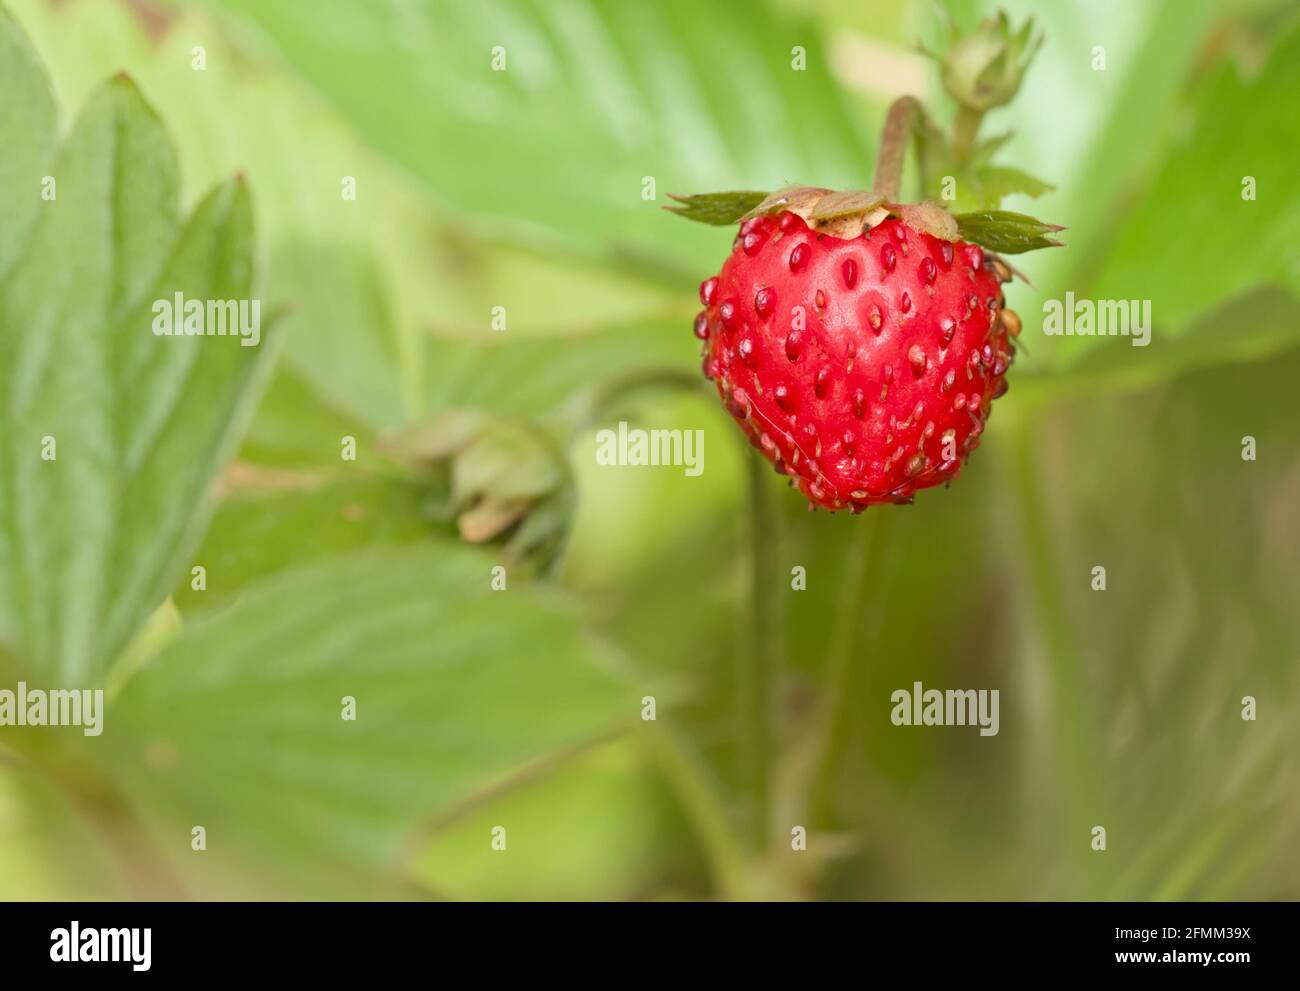 Red Fruit Of A Wild Strawberry, Fragaria vesca, Isolated Against A Background Of Green Leaves, New Forest UK Stock Photo